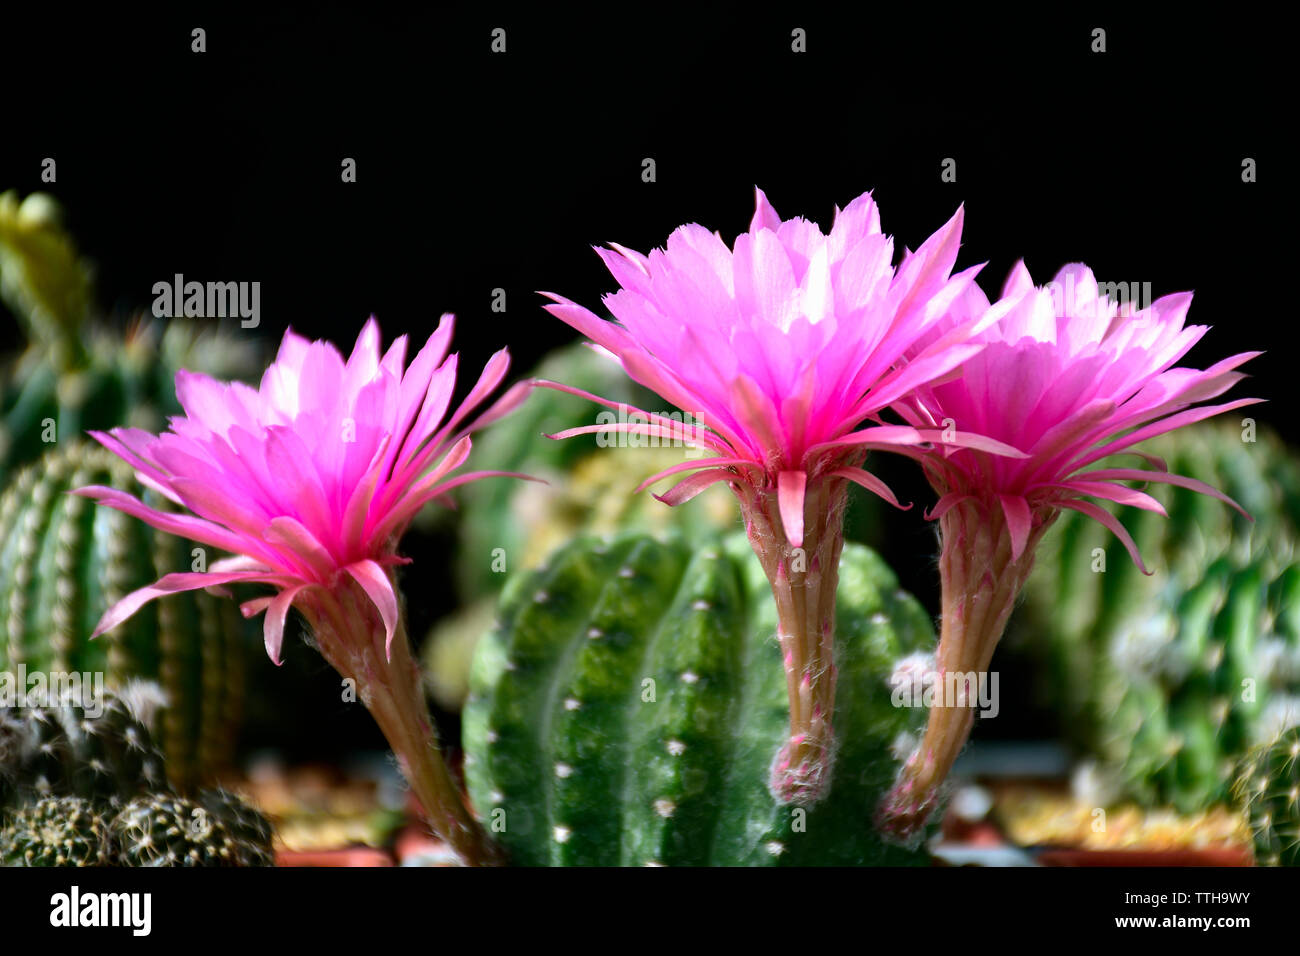 Pink flowers of hybrid cactus between Echinopsis and Lobivia with green and yellow variegated stem. Stock Photo